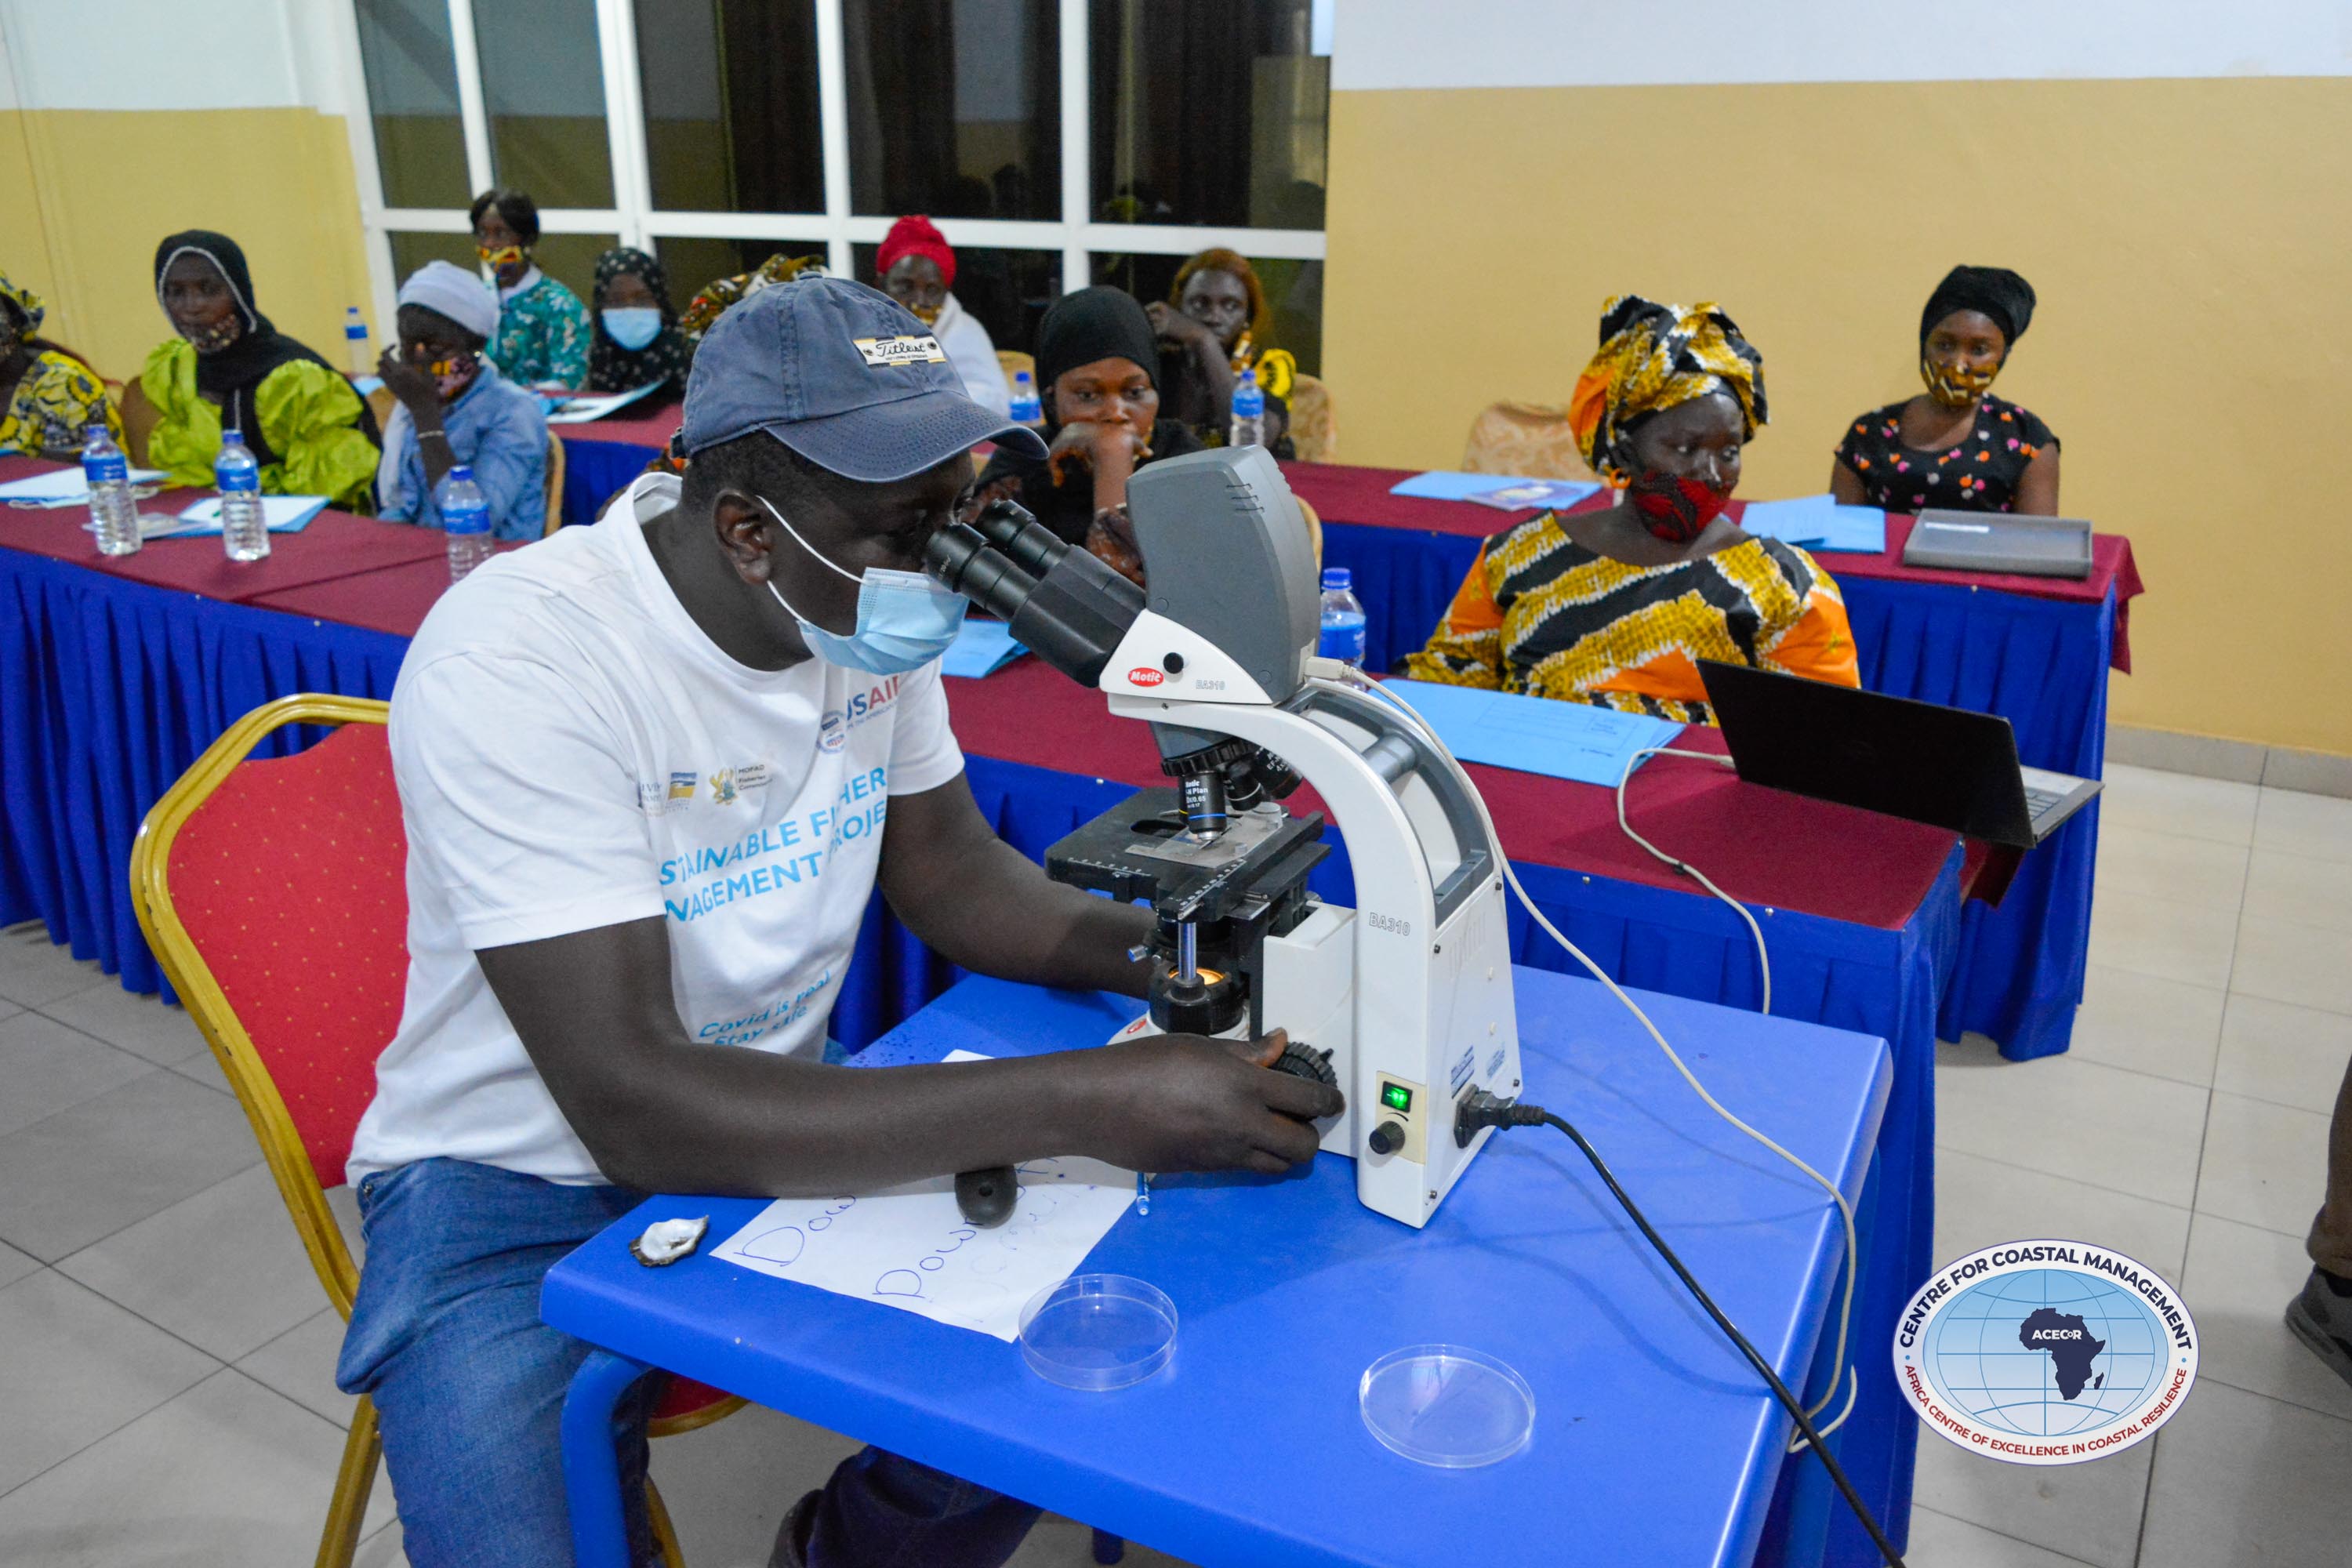 Trainer (Dr. Isaac Okyere) sets up microscope for demonstration